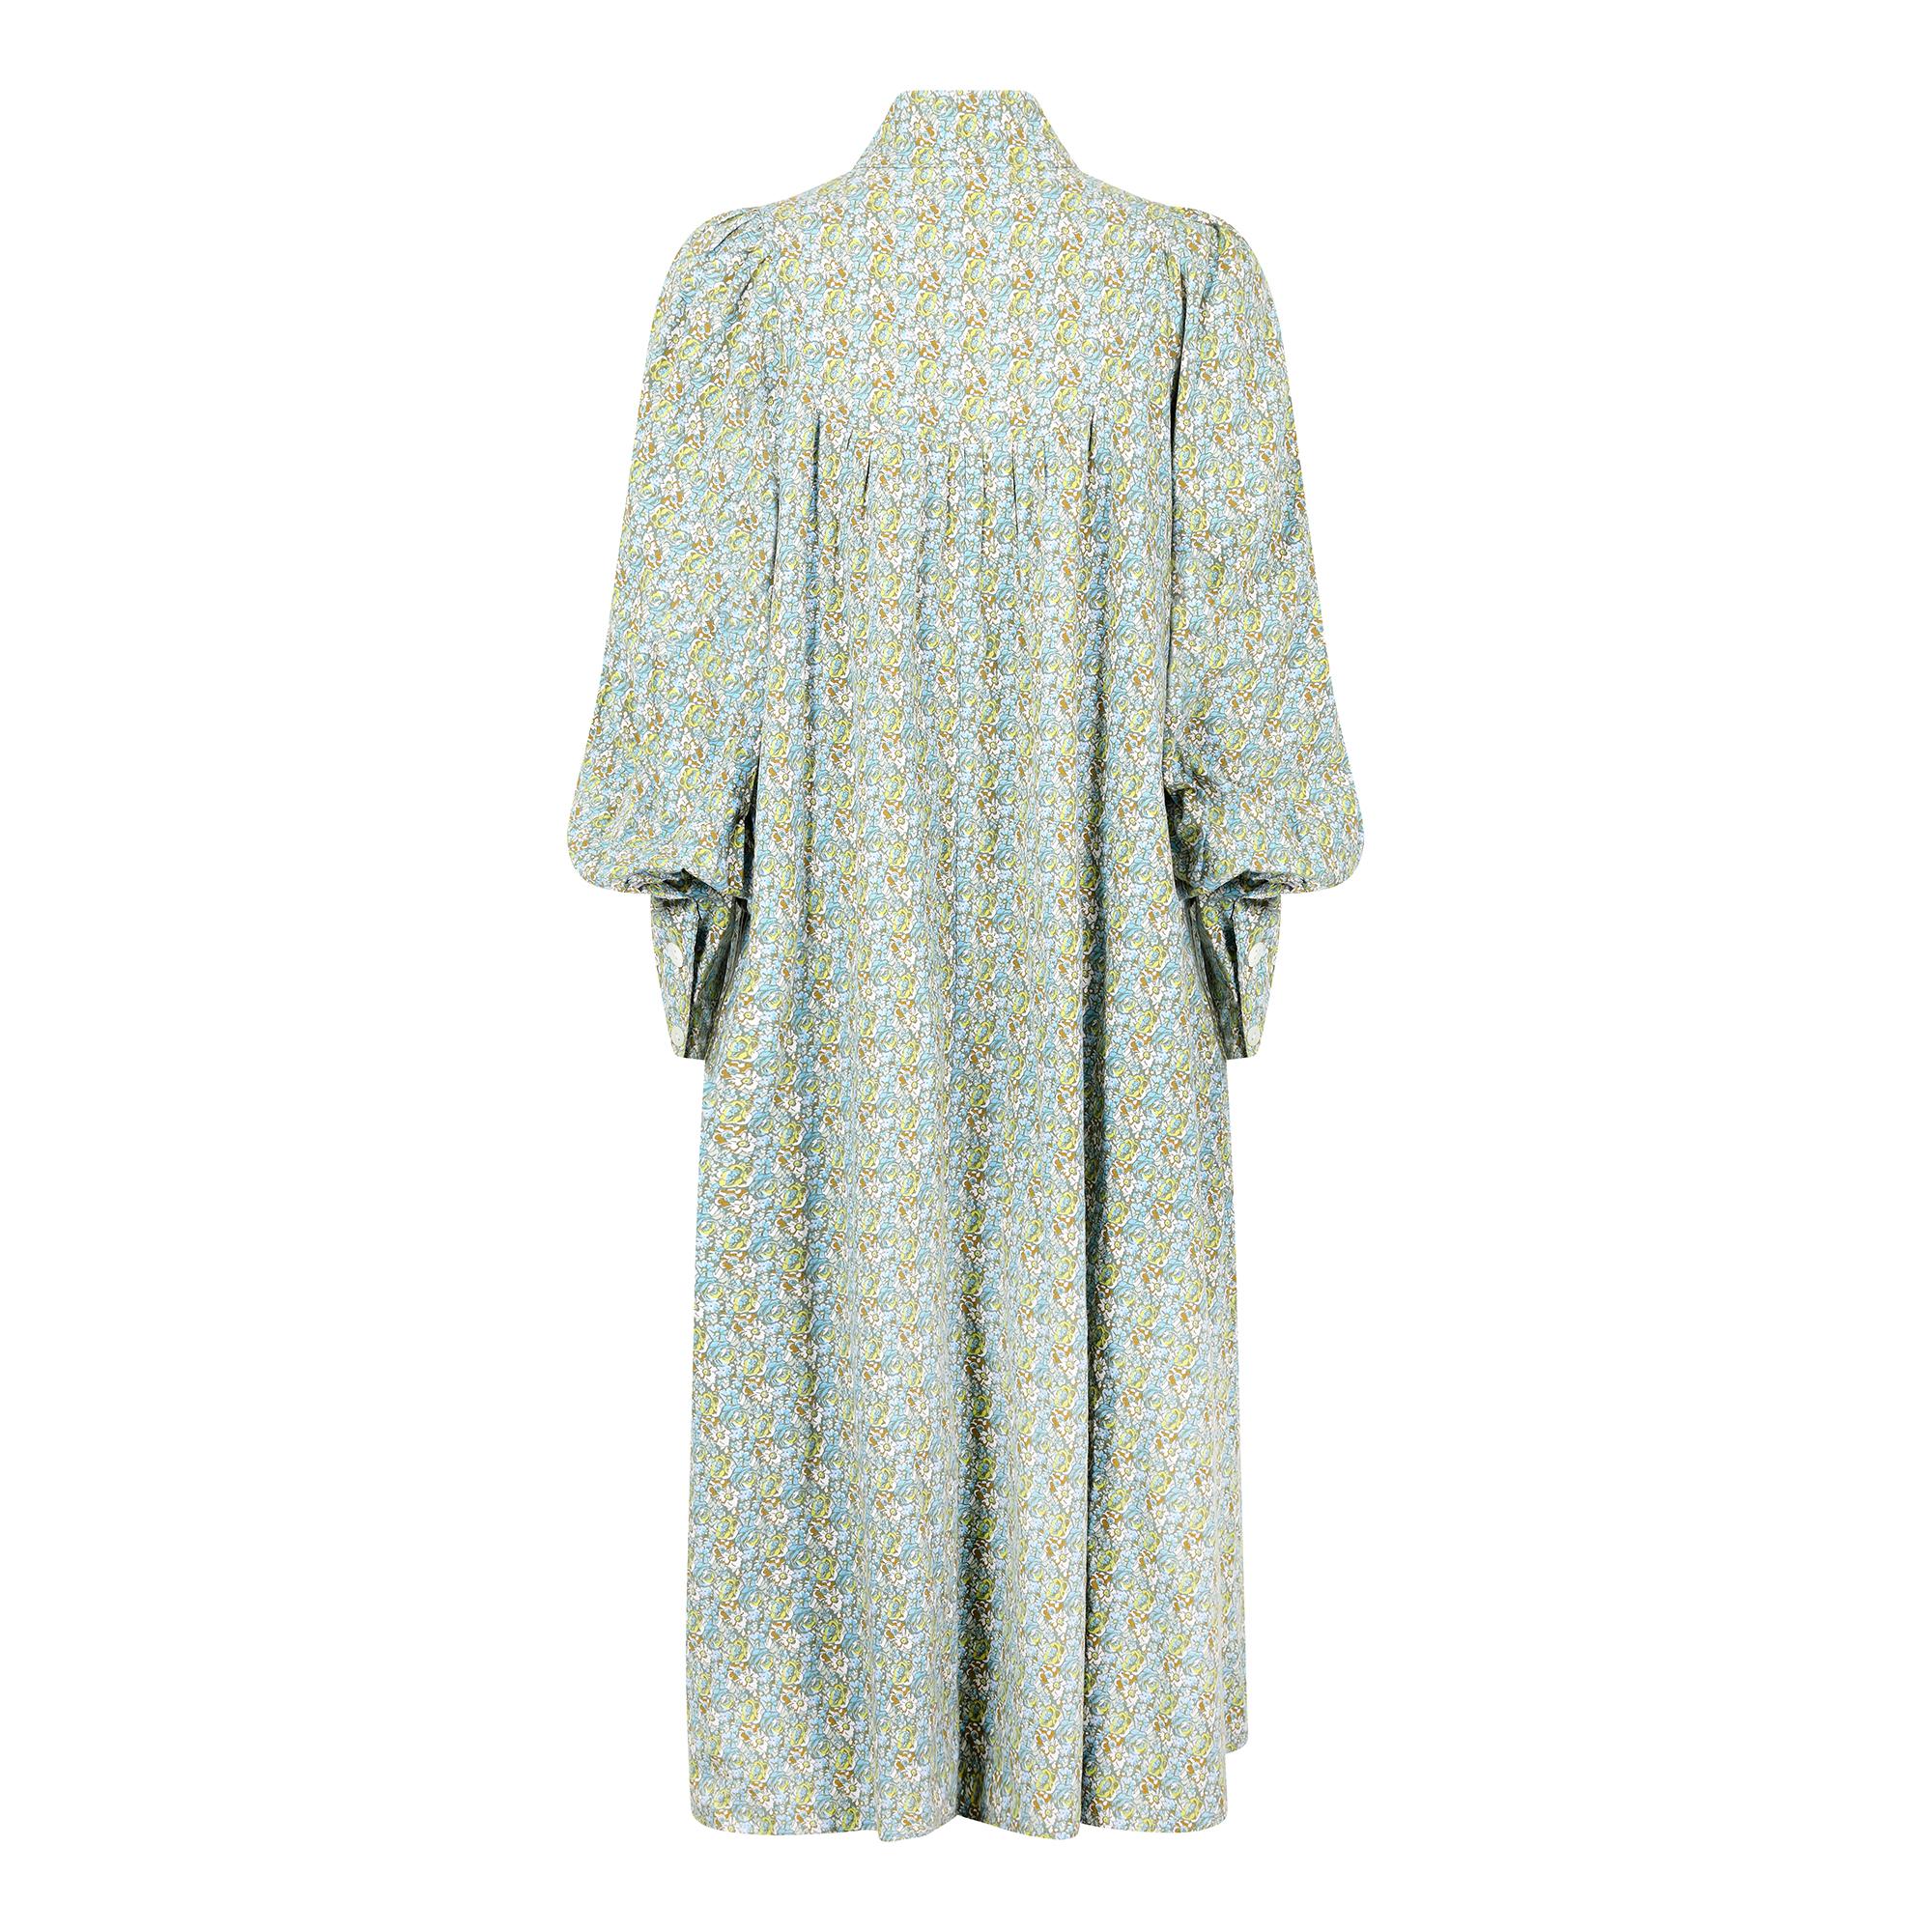 Laura Ashley was the most famous name on the British High Street from the late 1960s and throughout the 1970s.  The textile founded company made some fantastic and fabulous quality clothing taking inspiration from bygone eras. This dress is styled